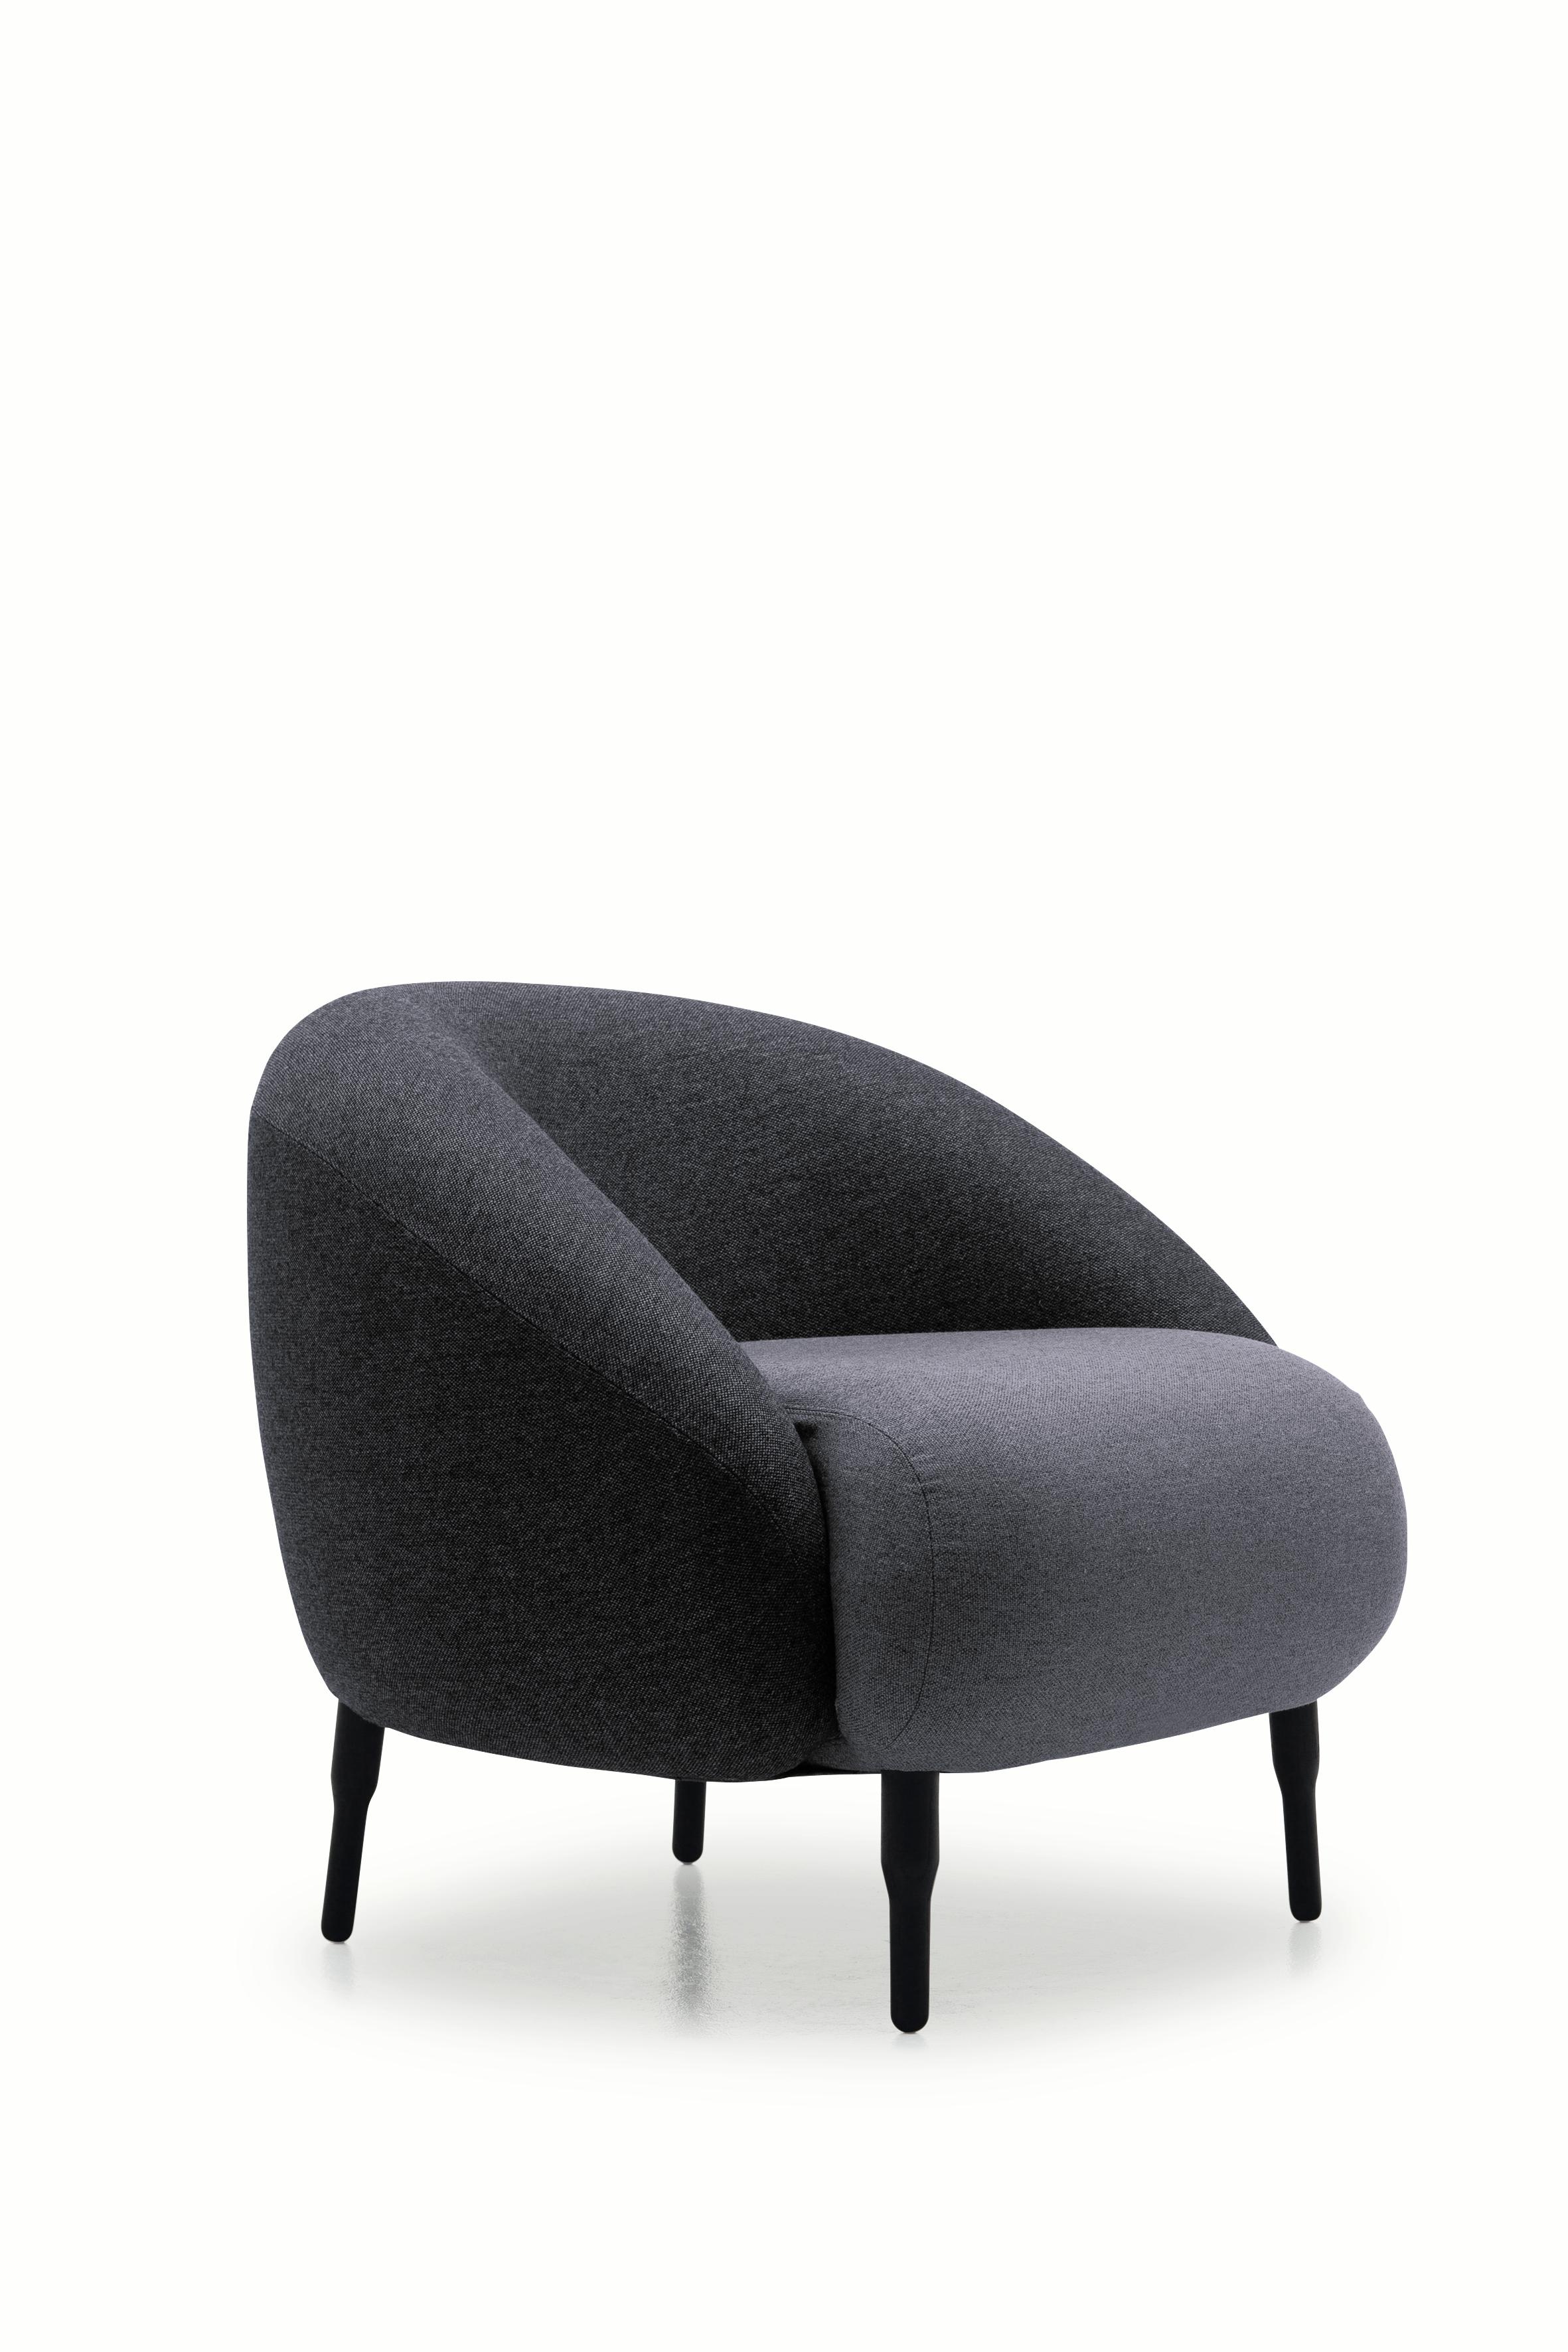 Introducing the versatile and very friendly Bump chair, the perfect solution for hotels and lounges. Available in alternative approaches to upholstery - one with a classic tight fit, and the other with excess fabric across the back. Illustrated in